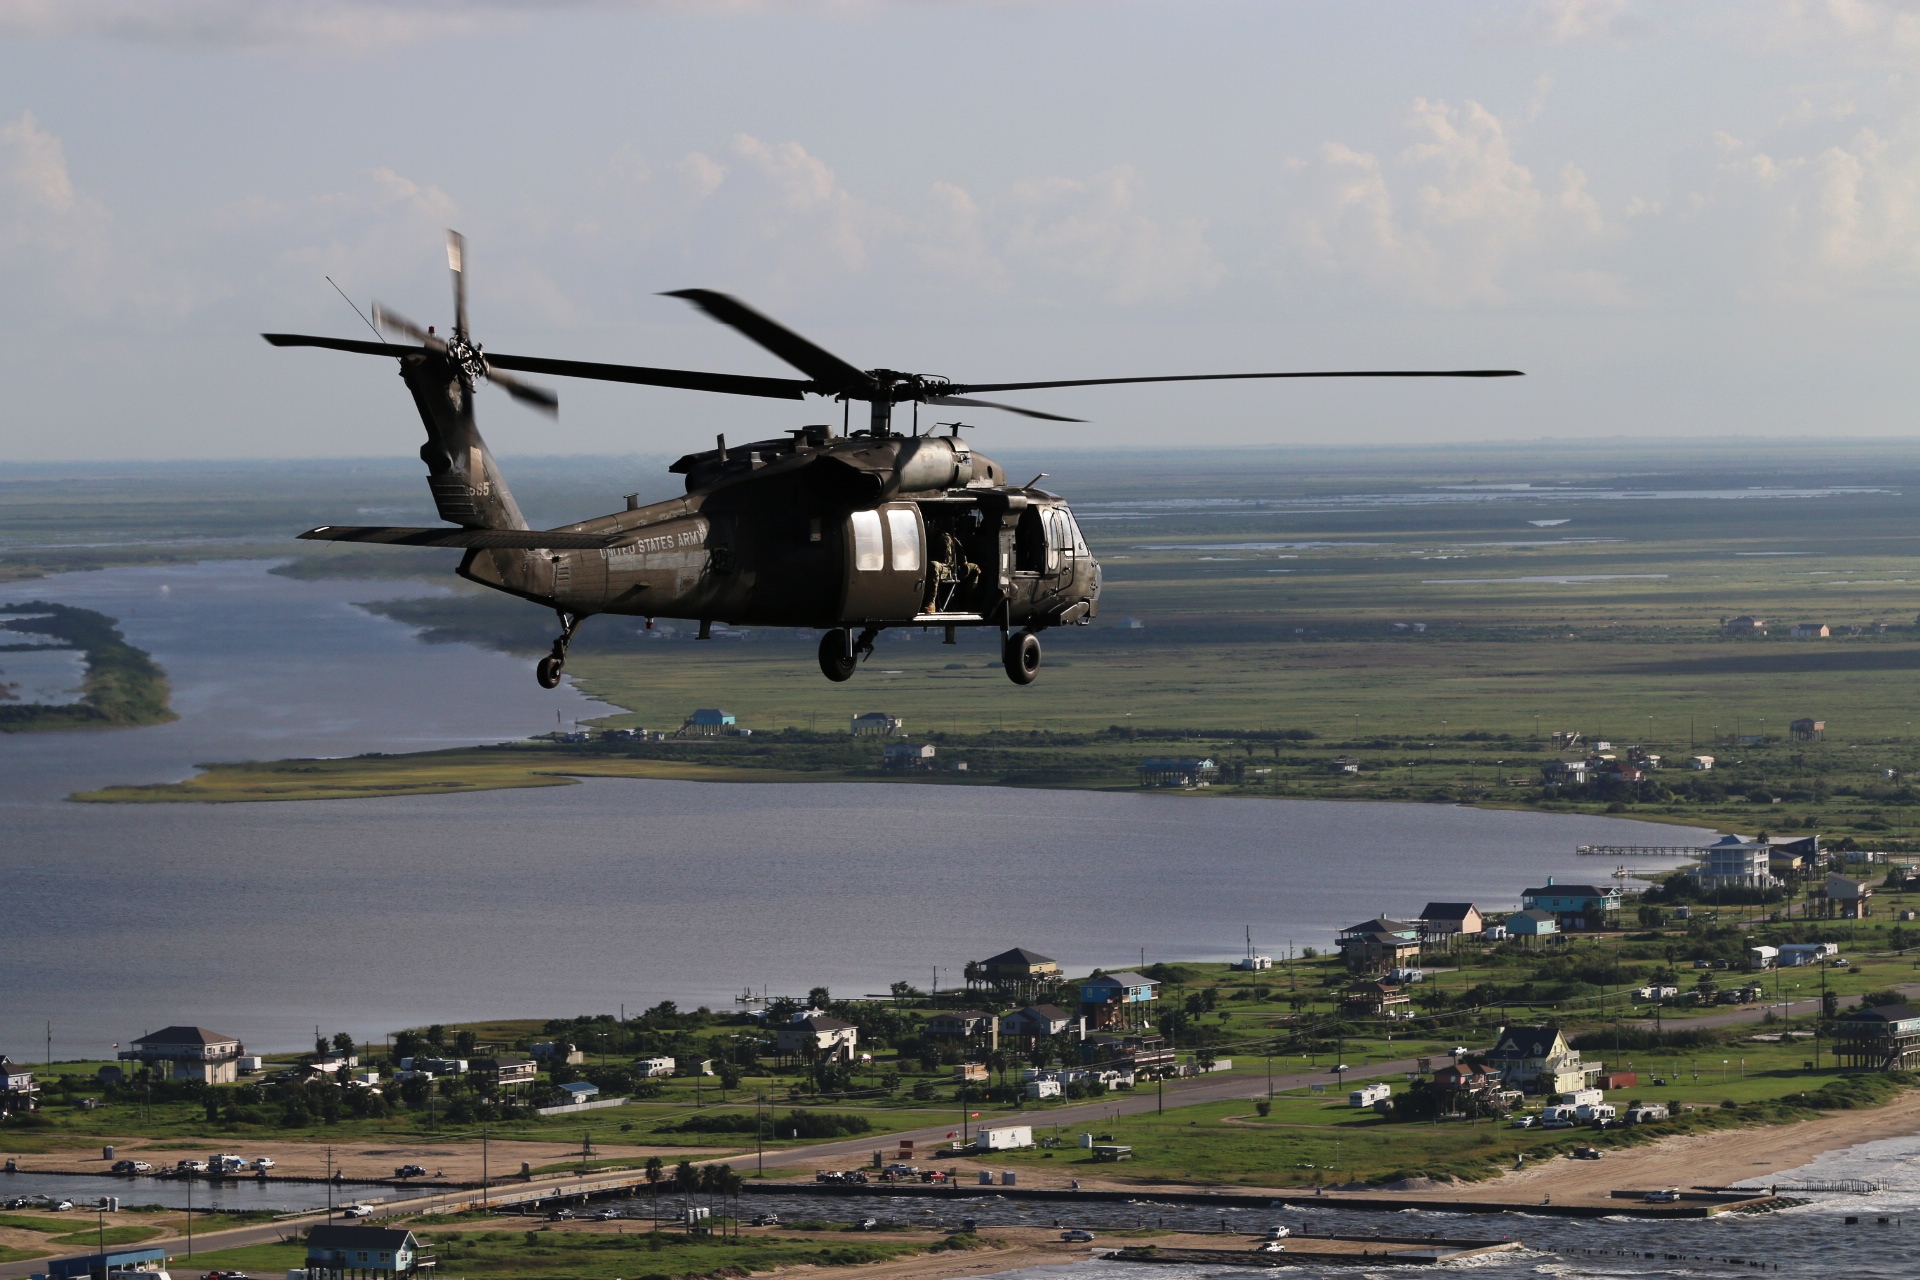 US Army helicopter over Bolivar Peninsula